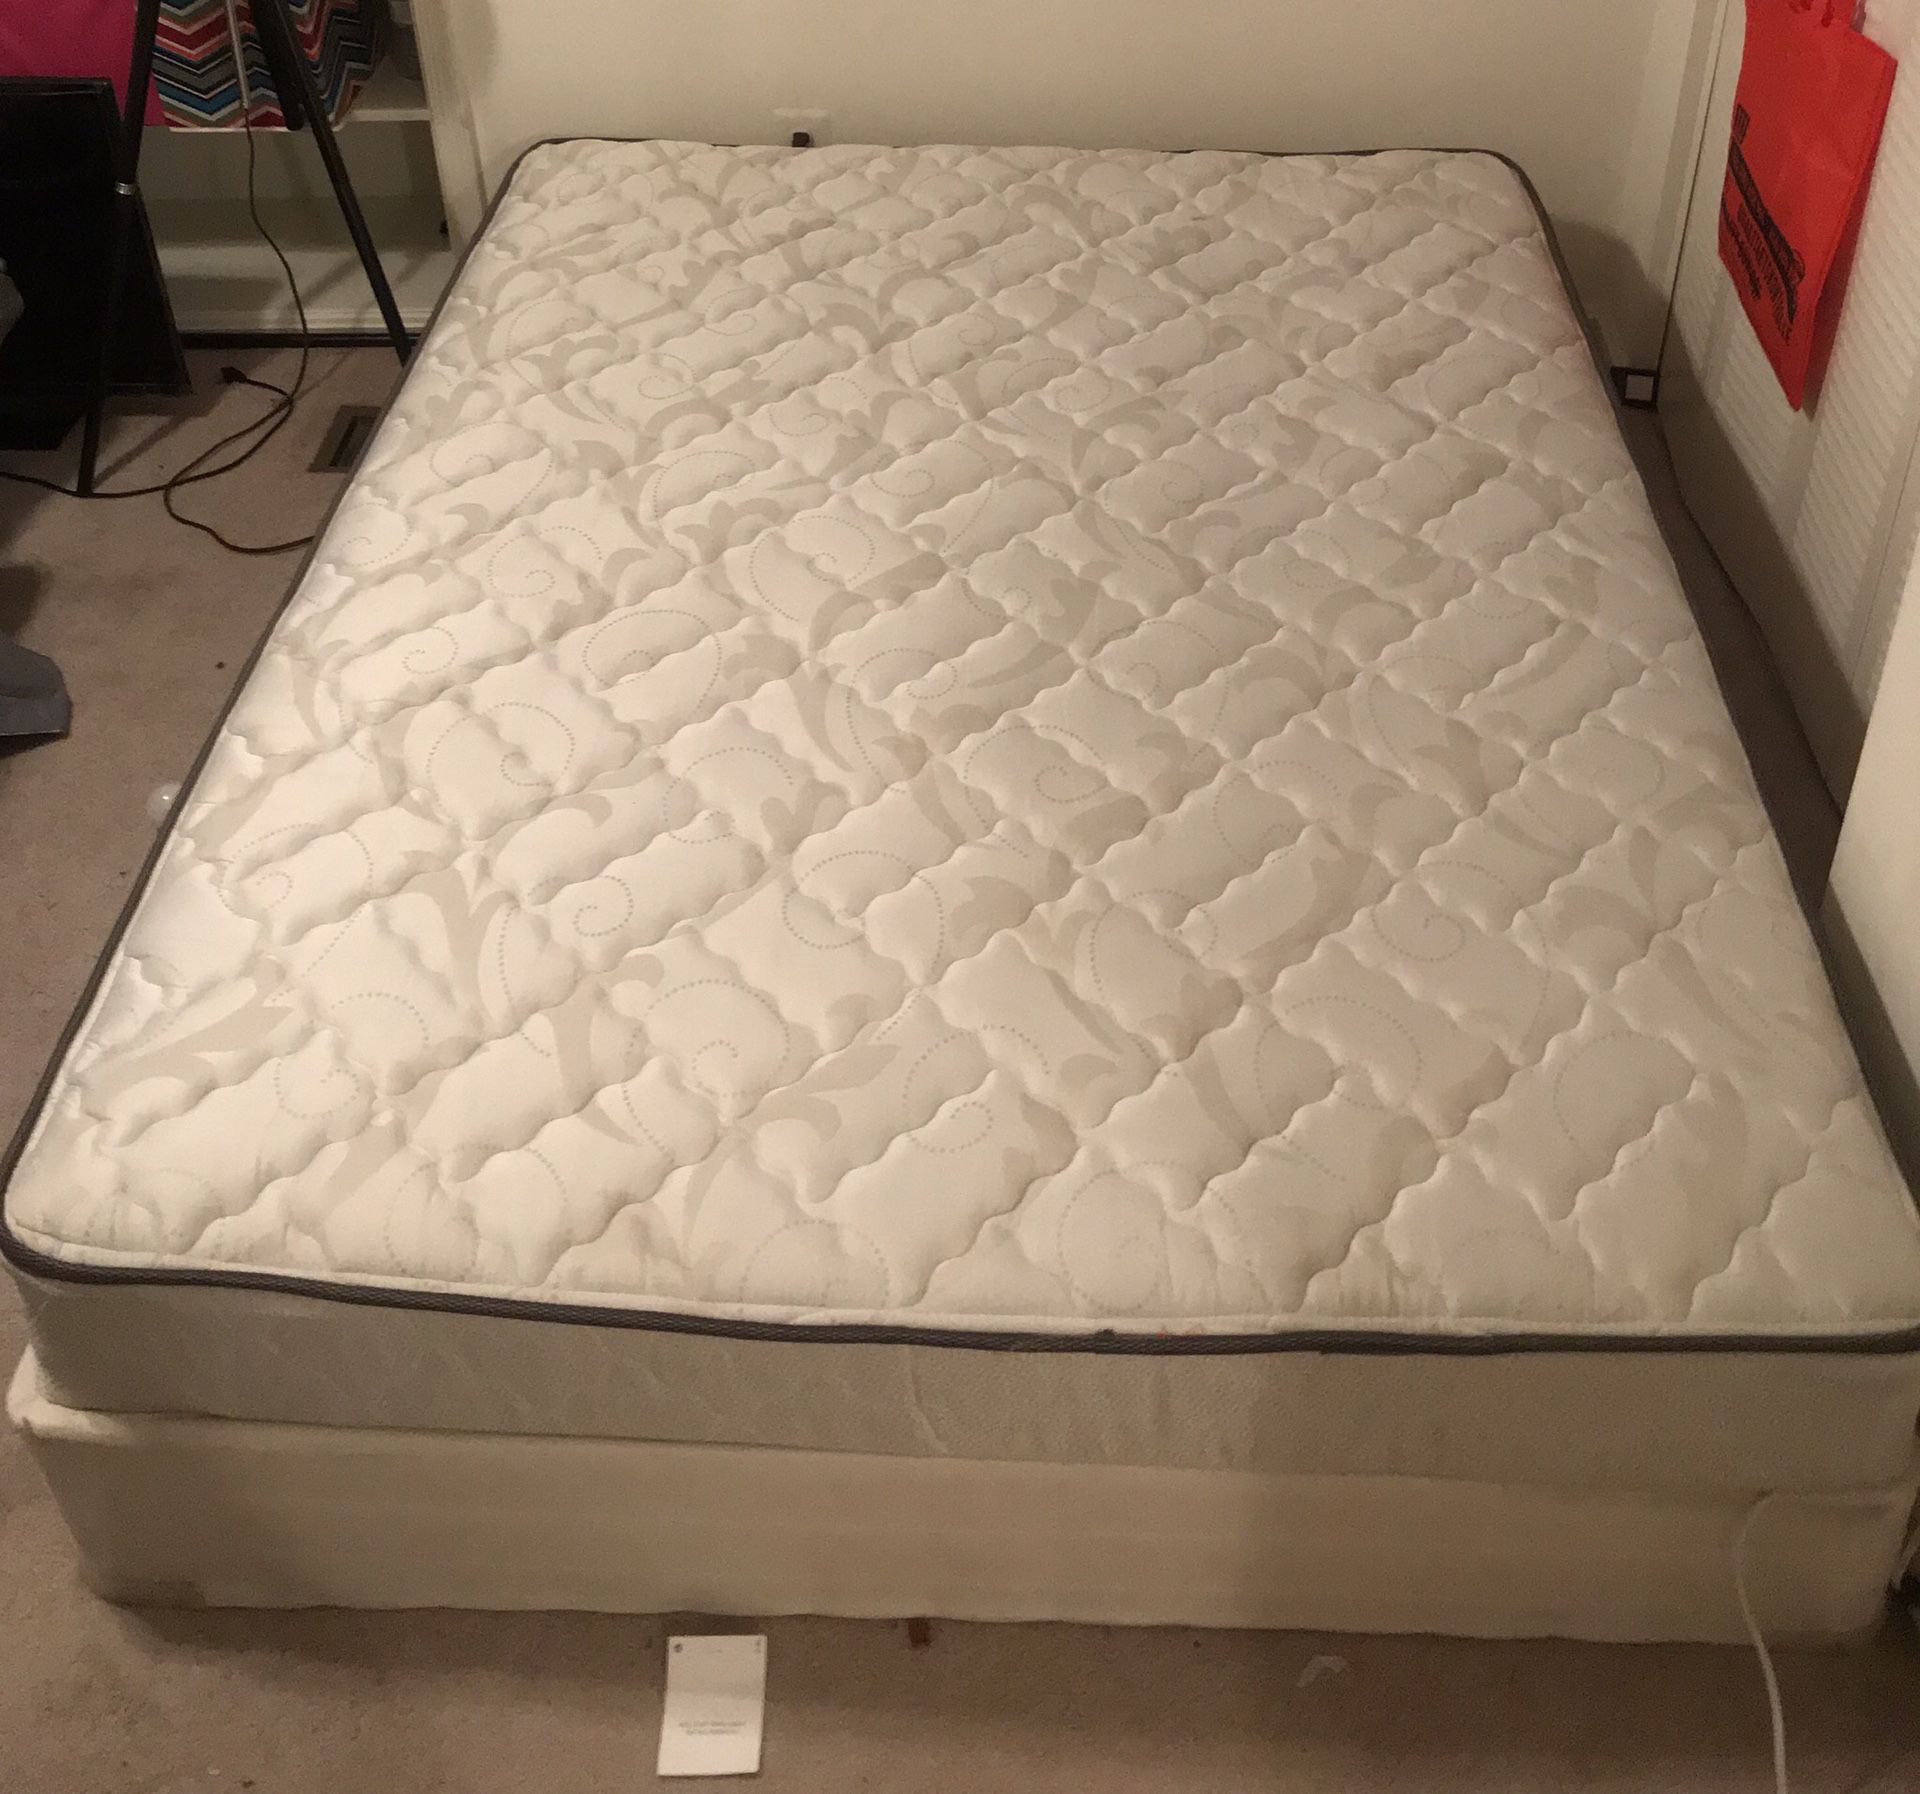 Queen bed and mattress (clean)”